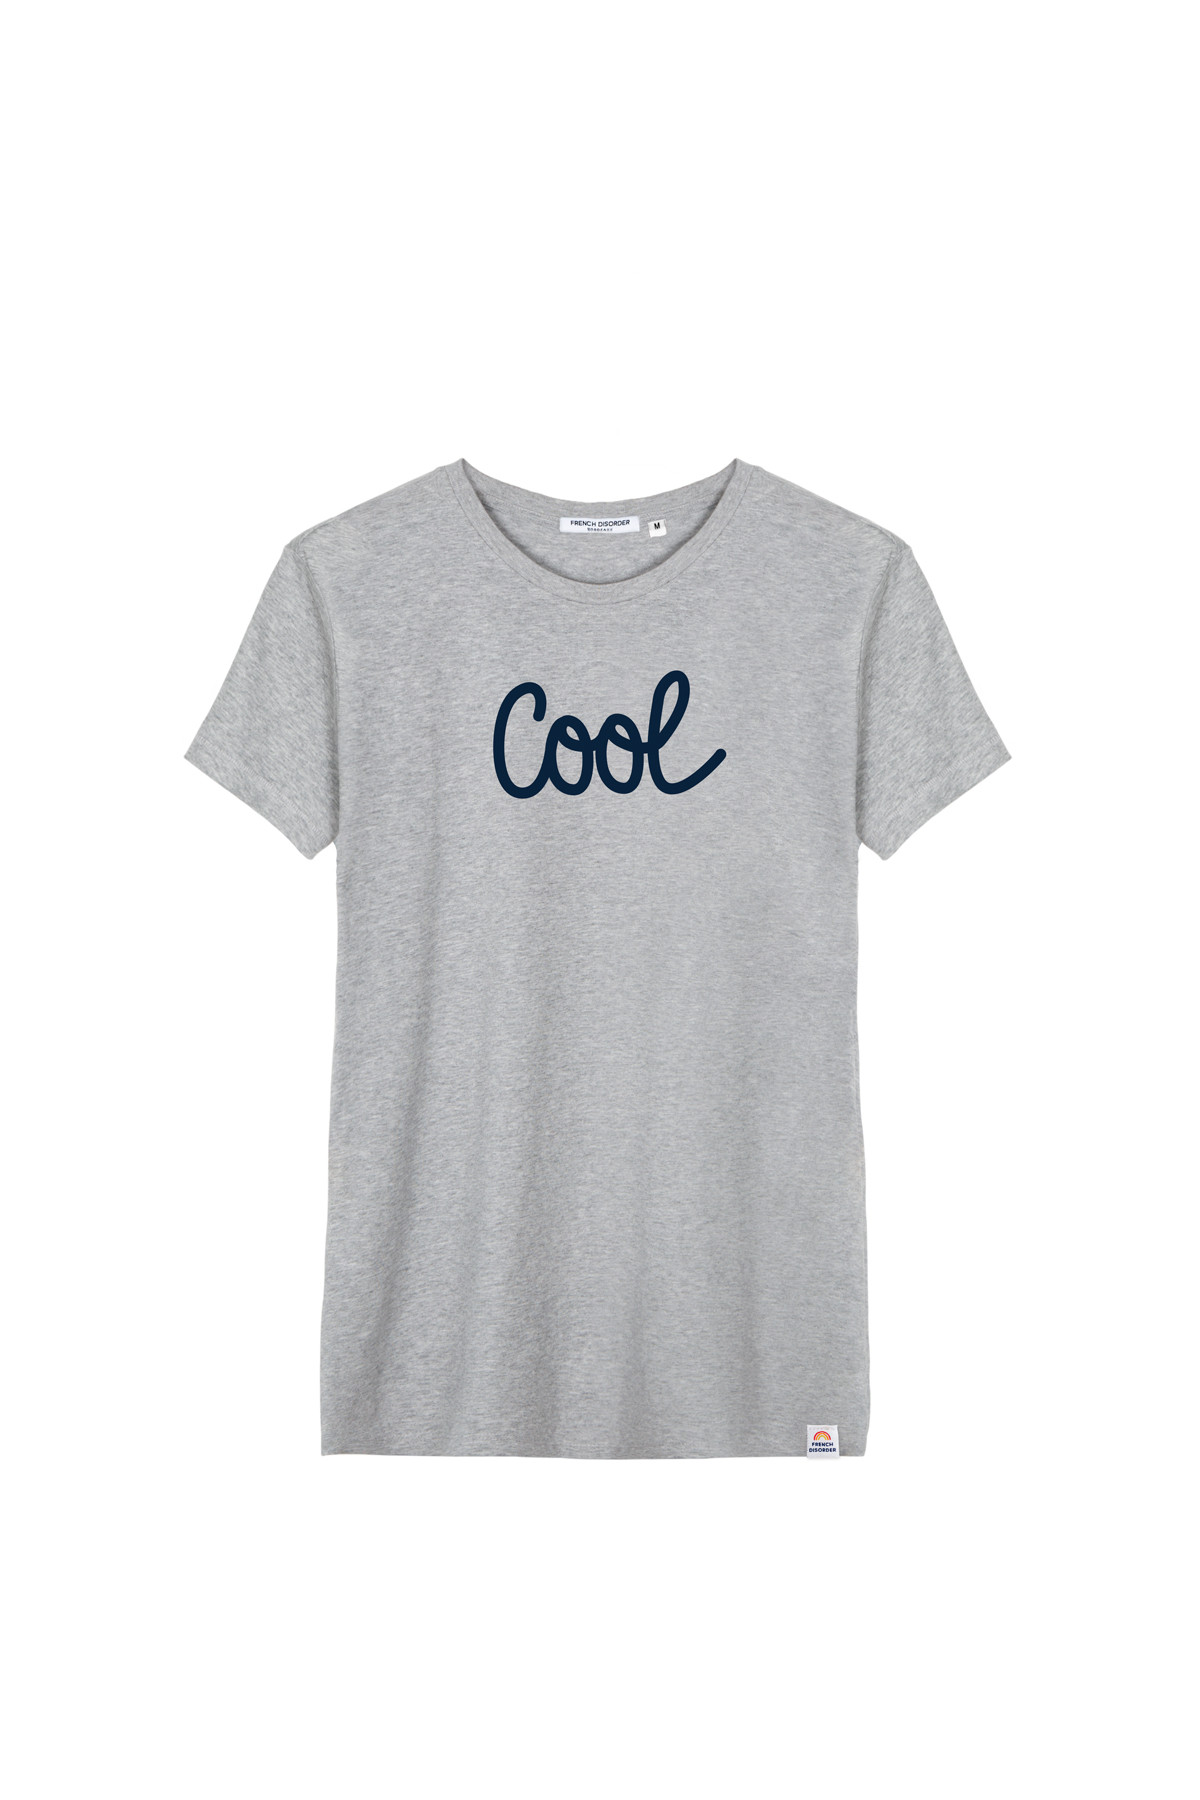 T-shirt COOL French Disorder